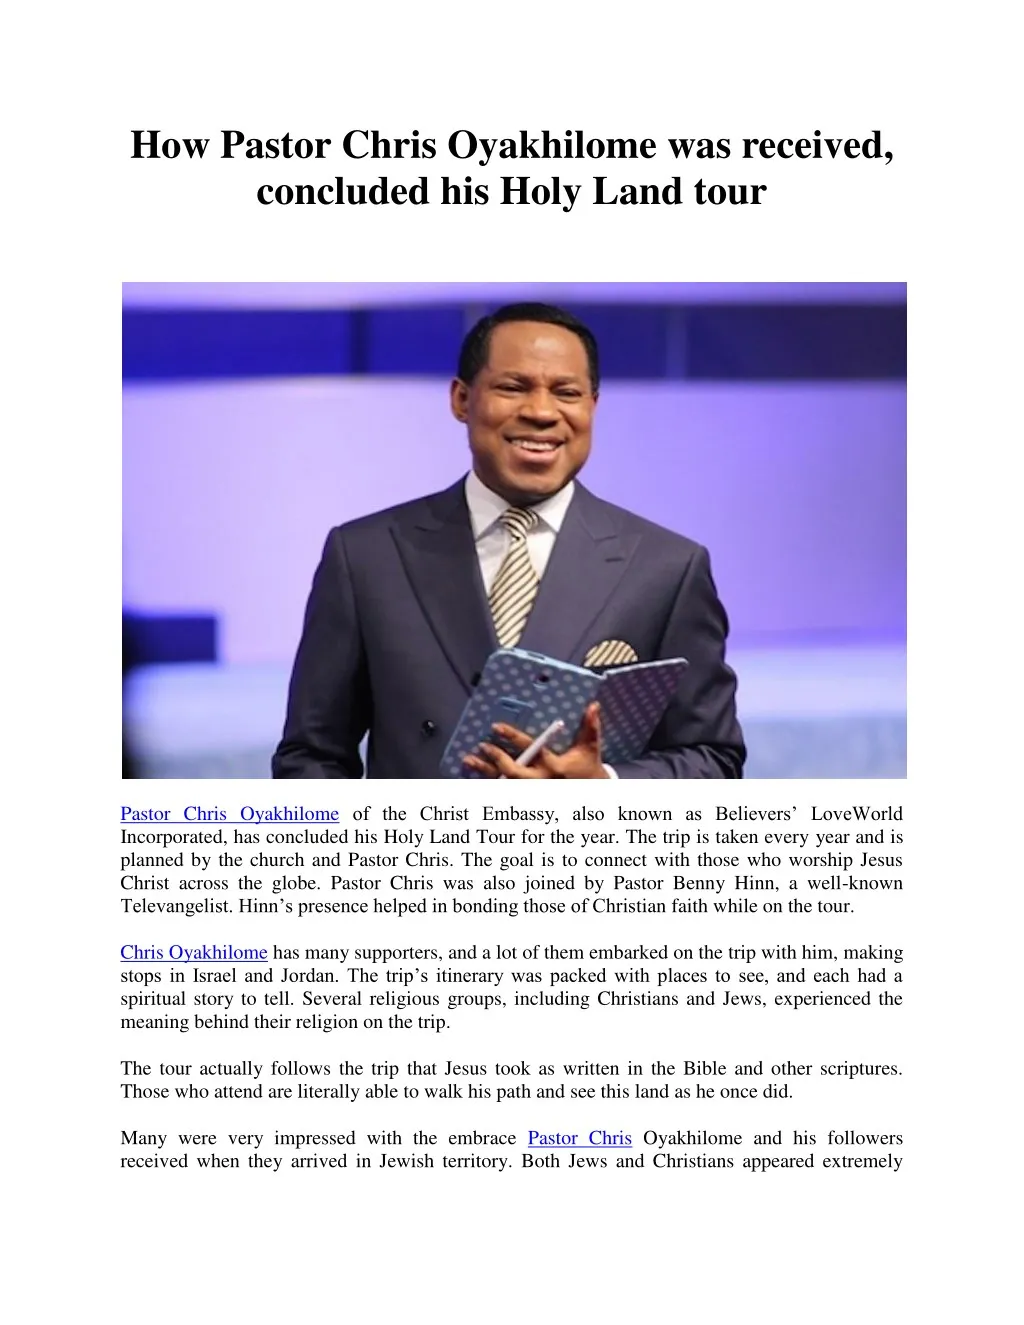 how pastor chris oyakhilome was received